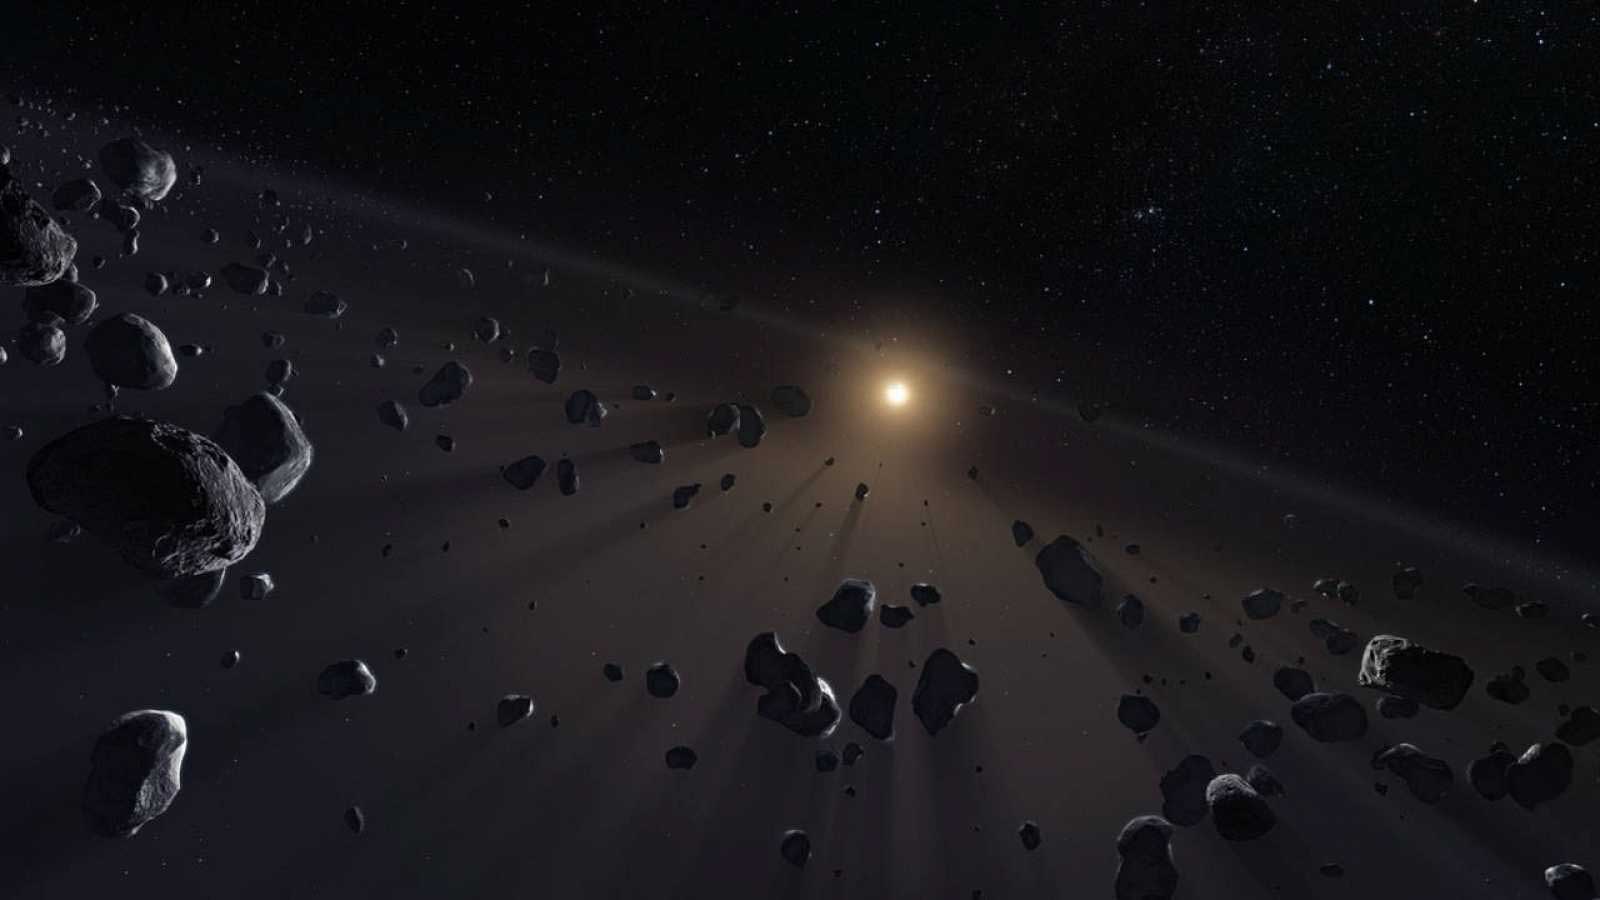 Mystery orbits in outermost reaches of solar system not caused